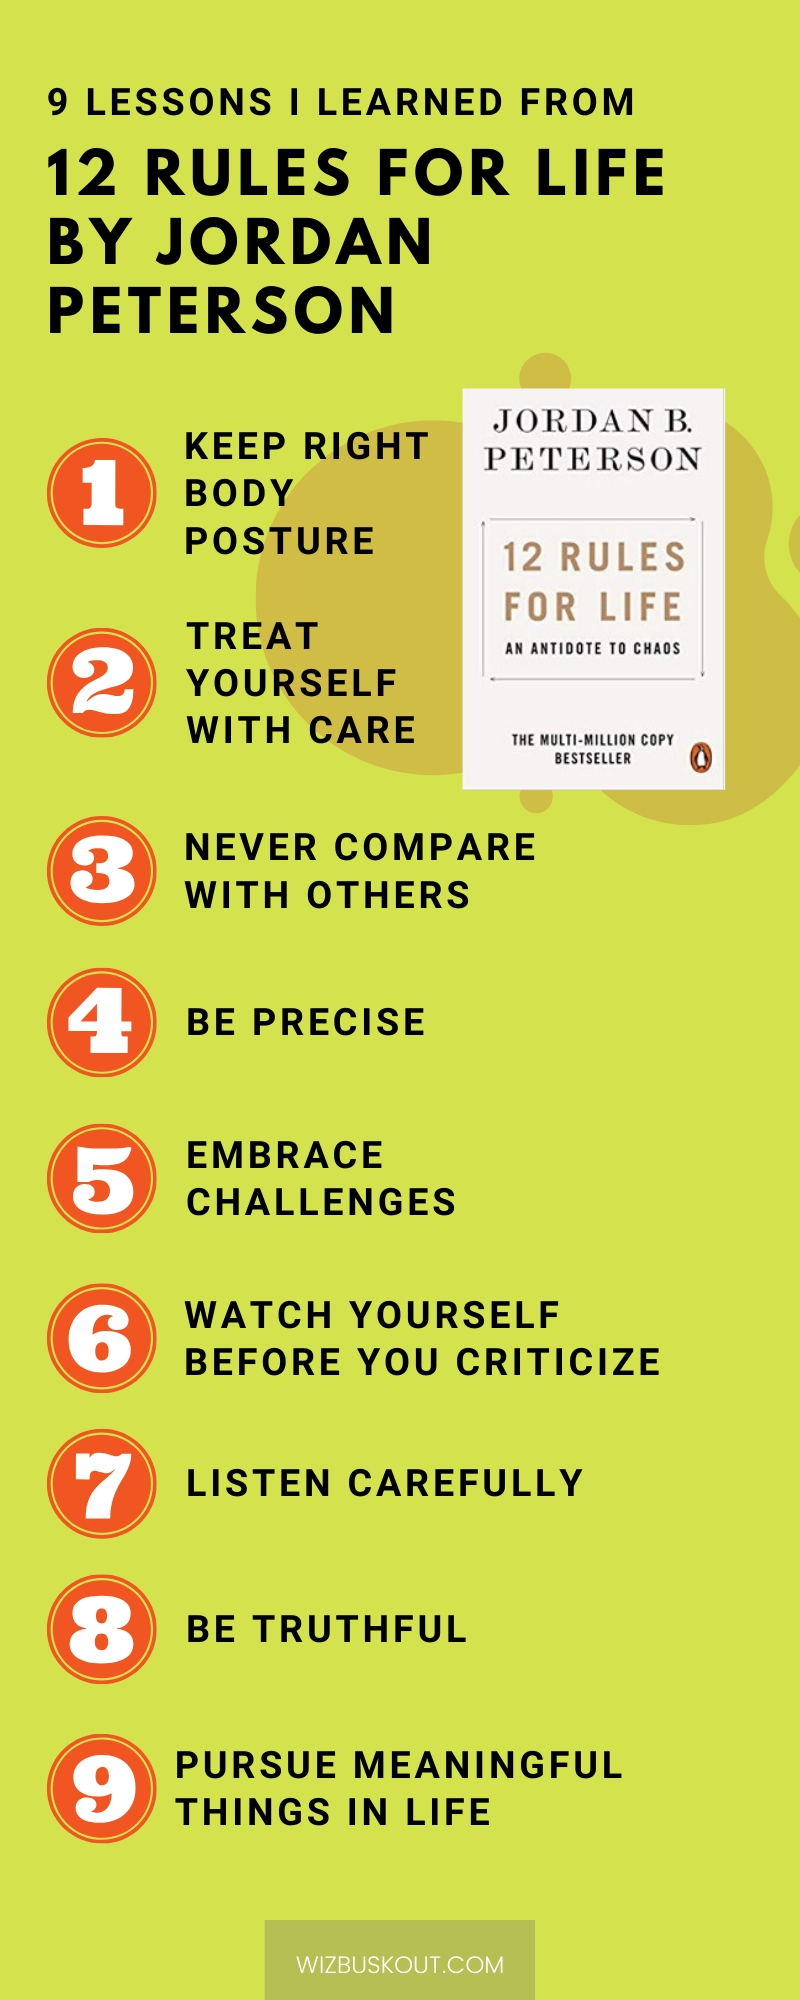 12 rules for life summary infographic